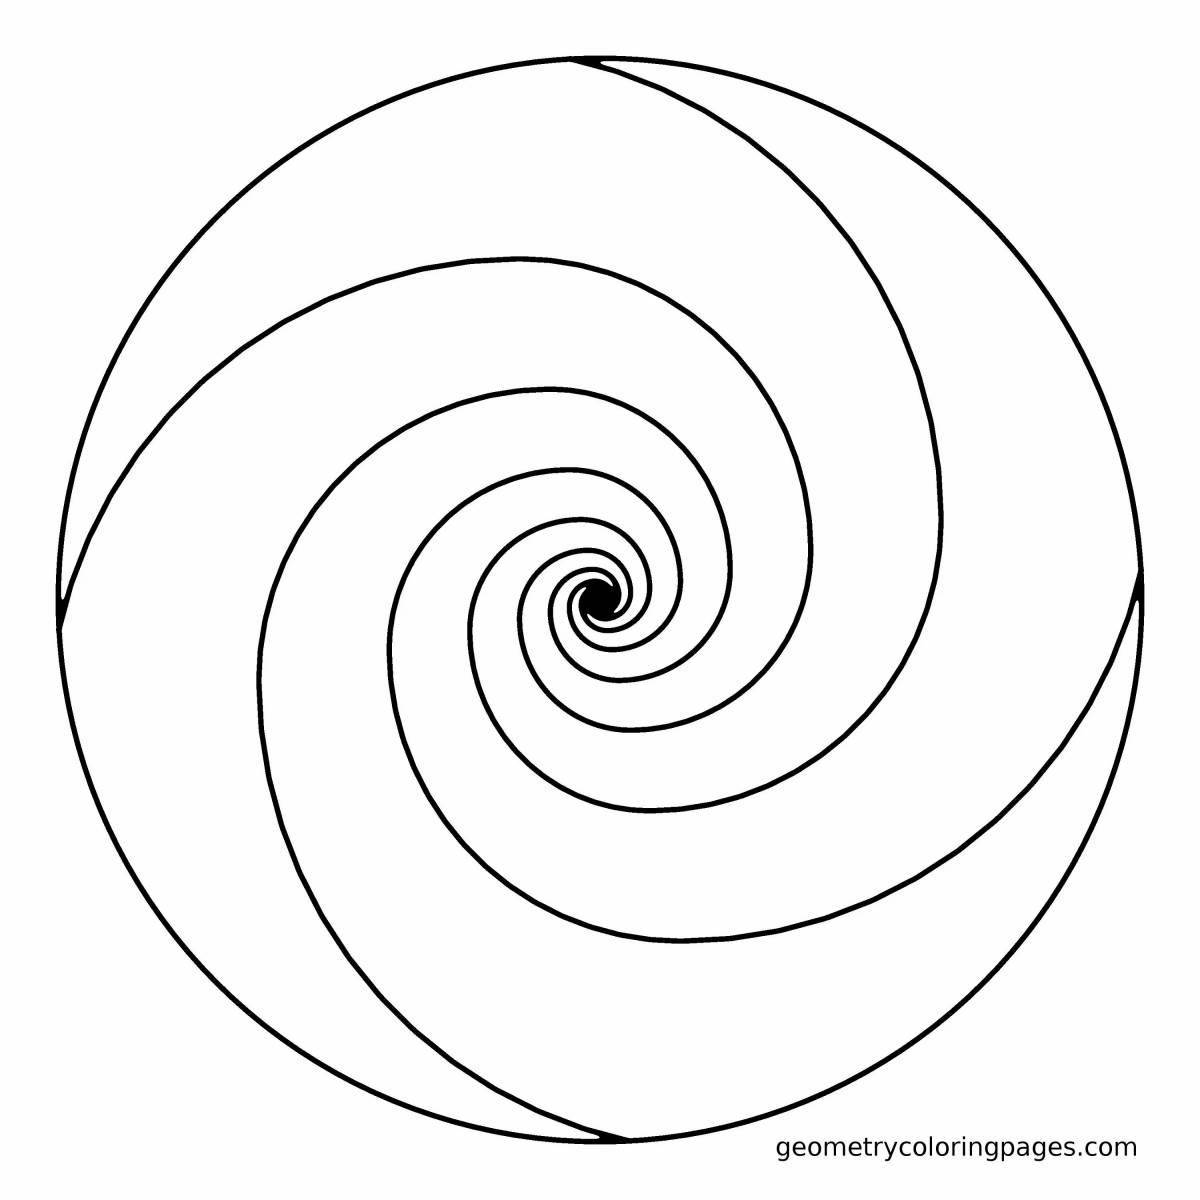 Multicolored spiral coloring book for kids